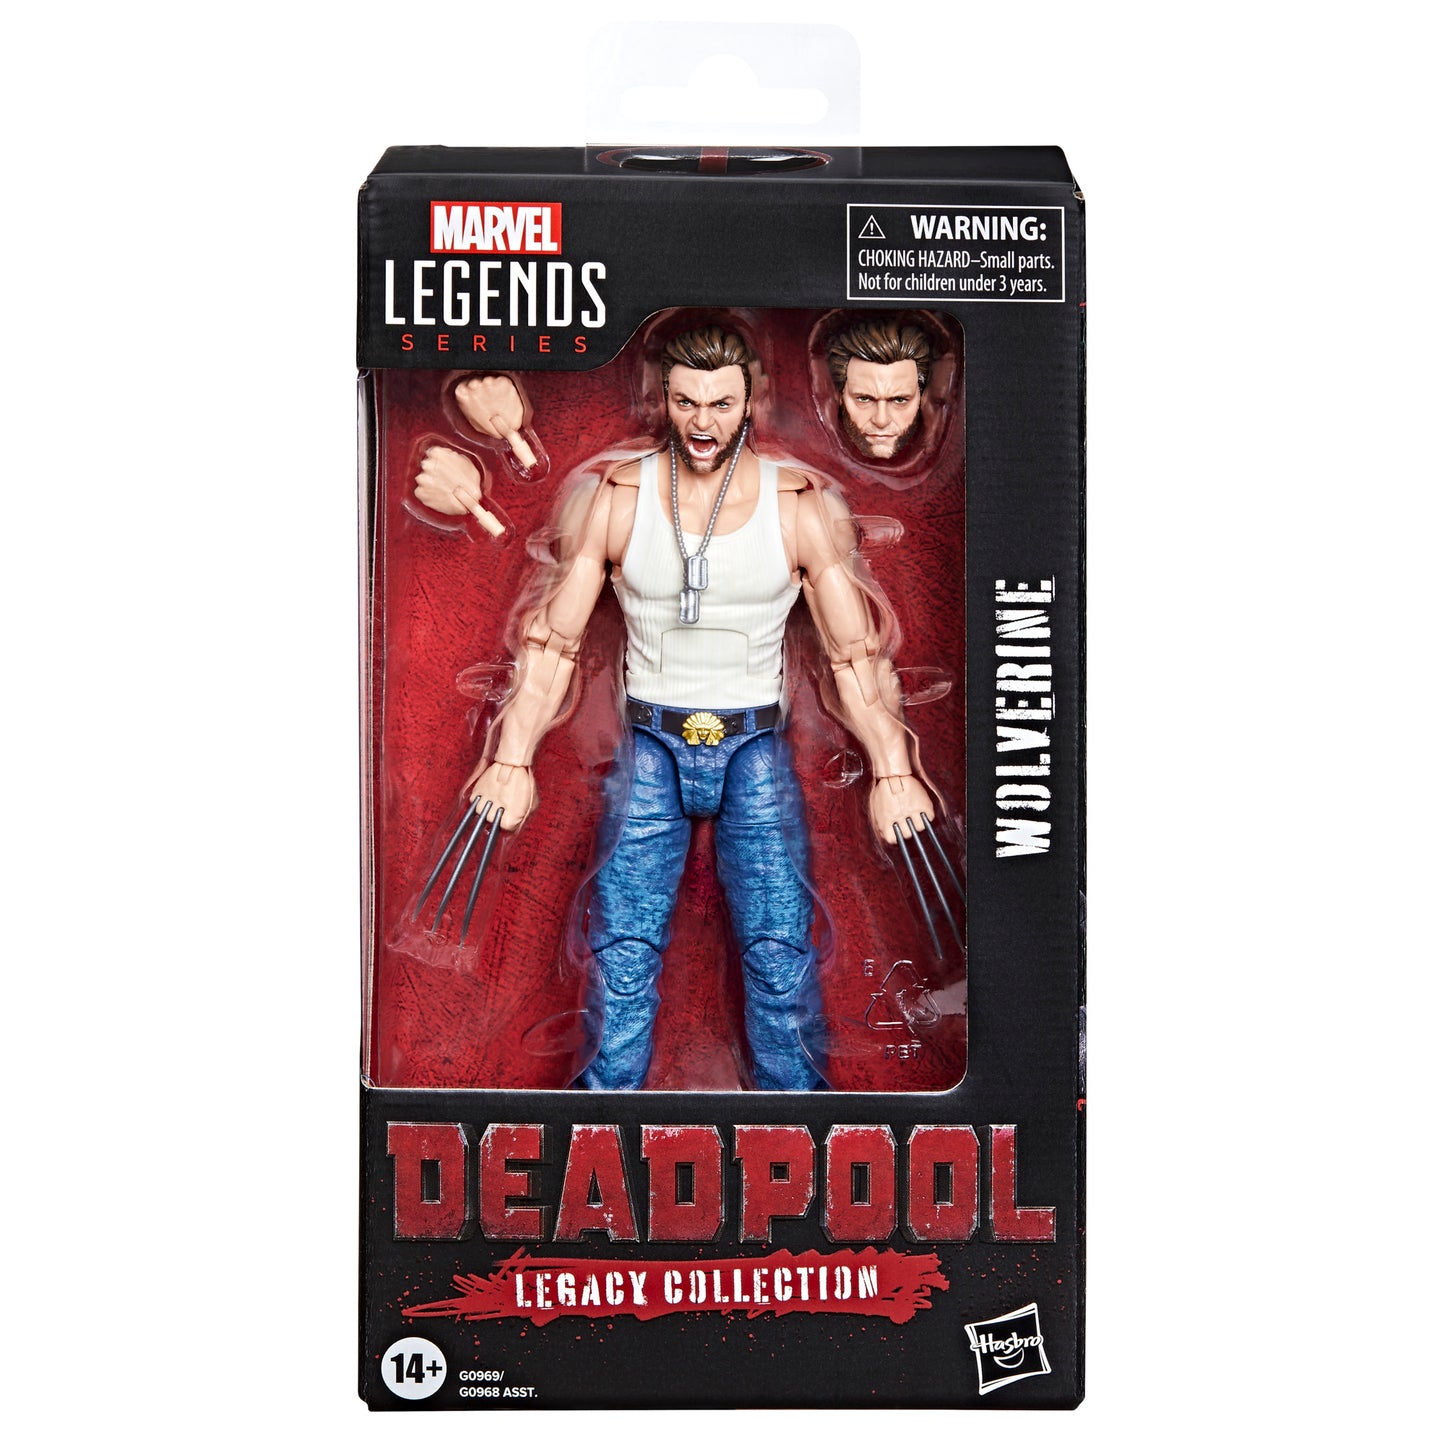 [PRE-ORDER] Marvel Legends Series Wolverine, Deadpool 2 Adult Collectible 6 Inch Action Figure